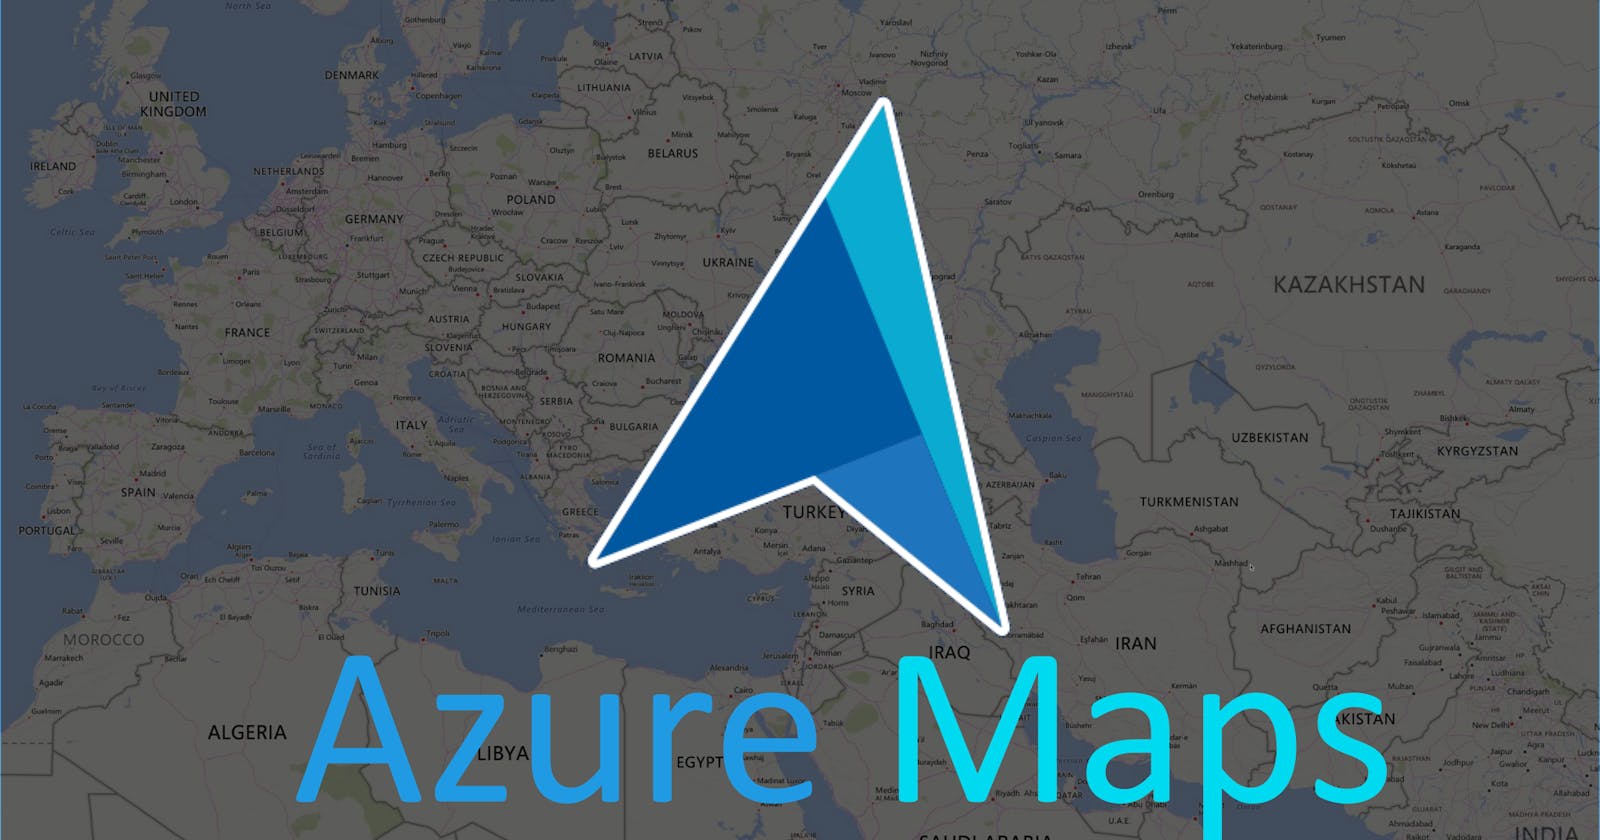 Navigating the World of Possibilities with Azure Maps